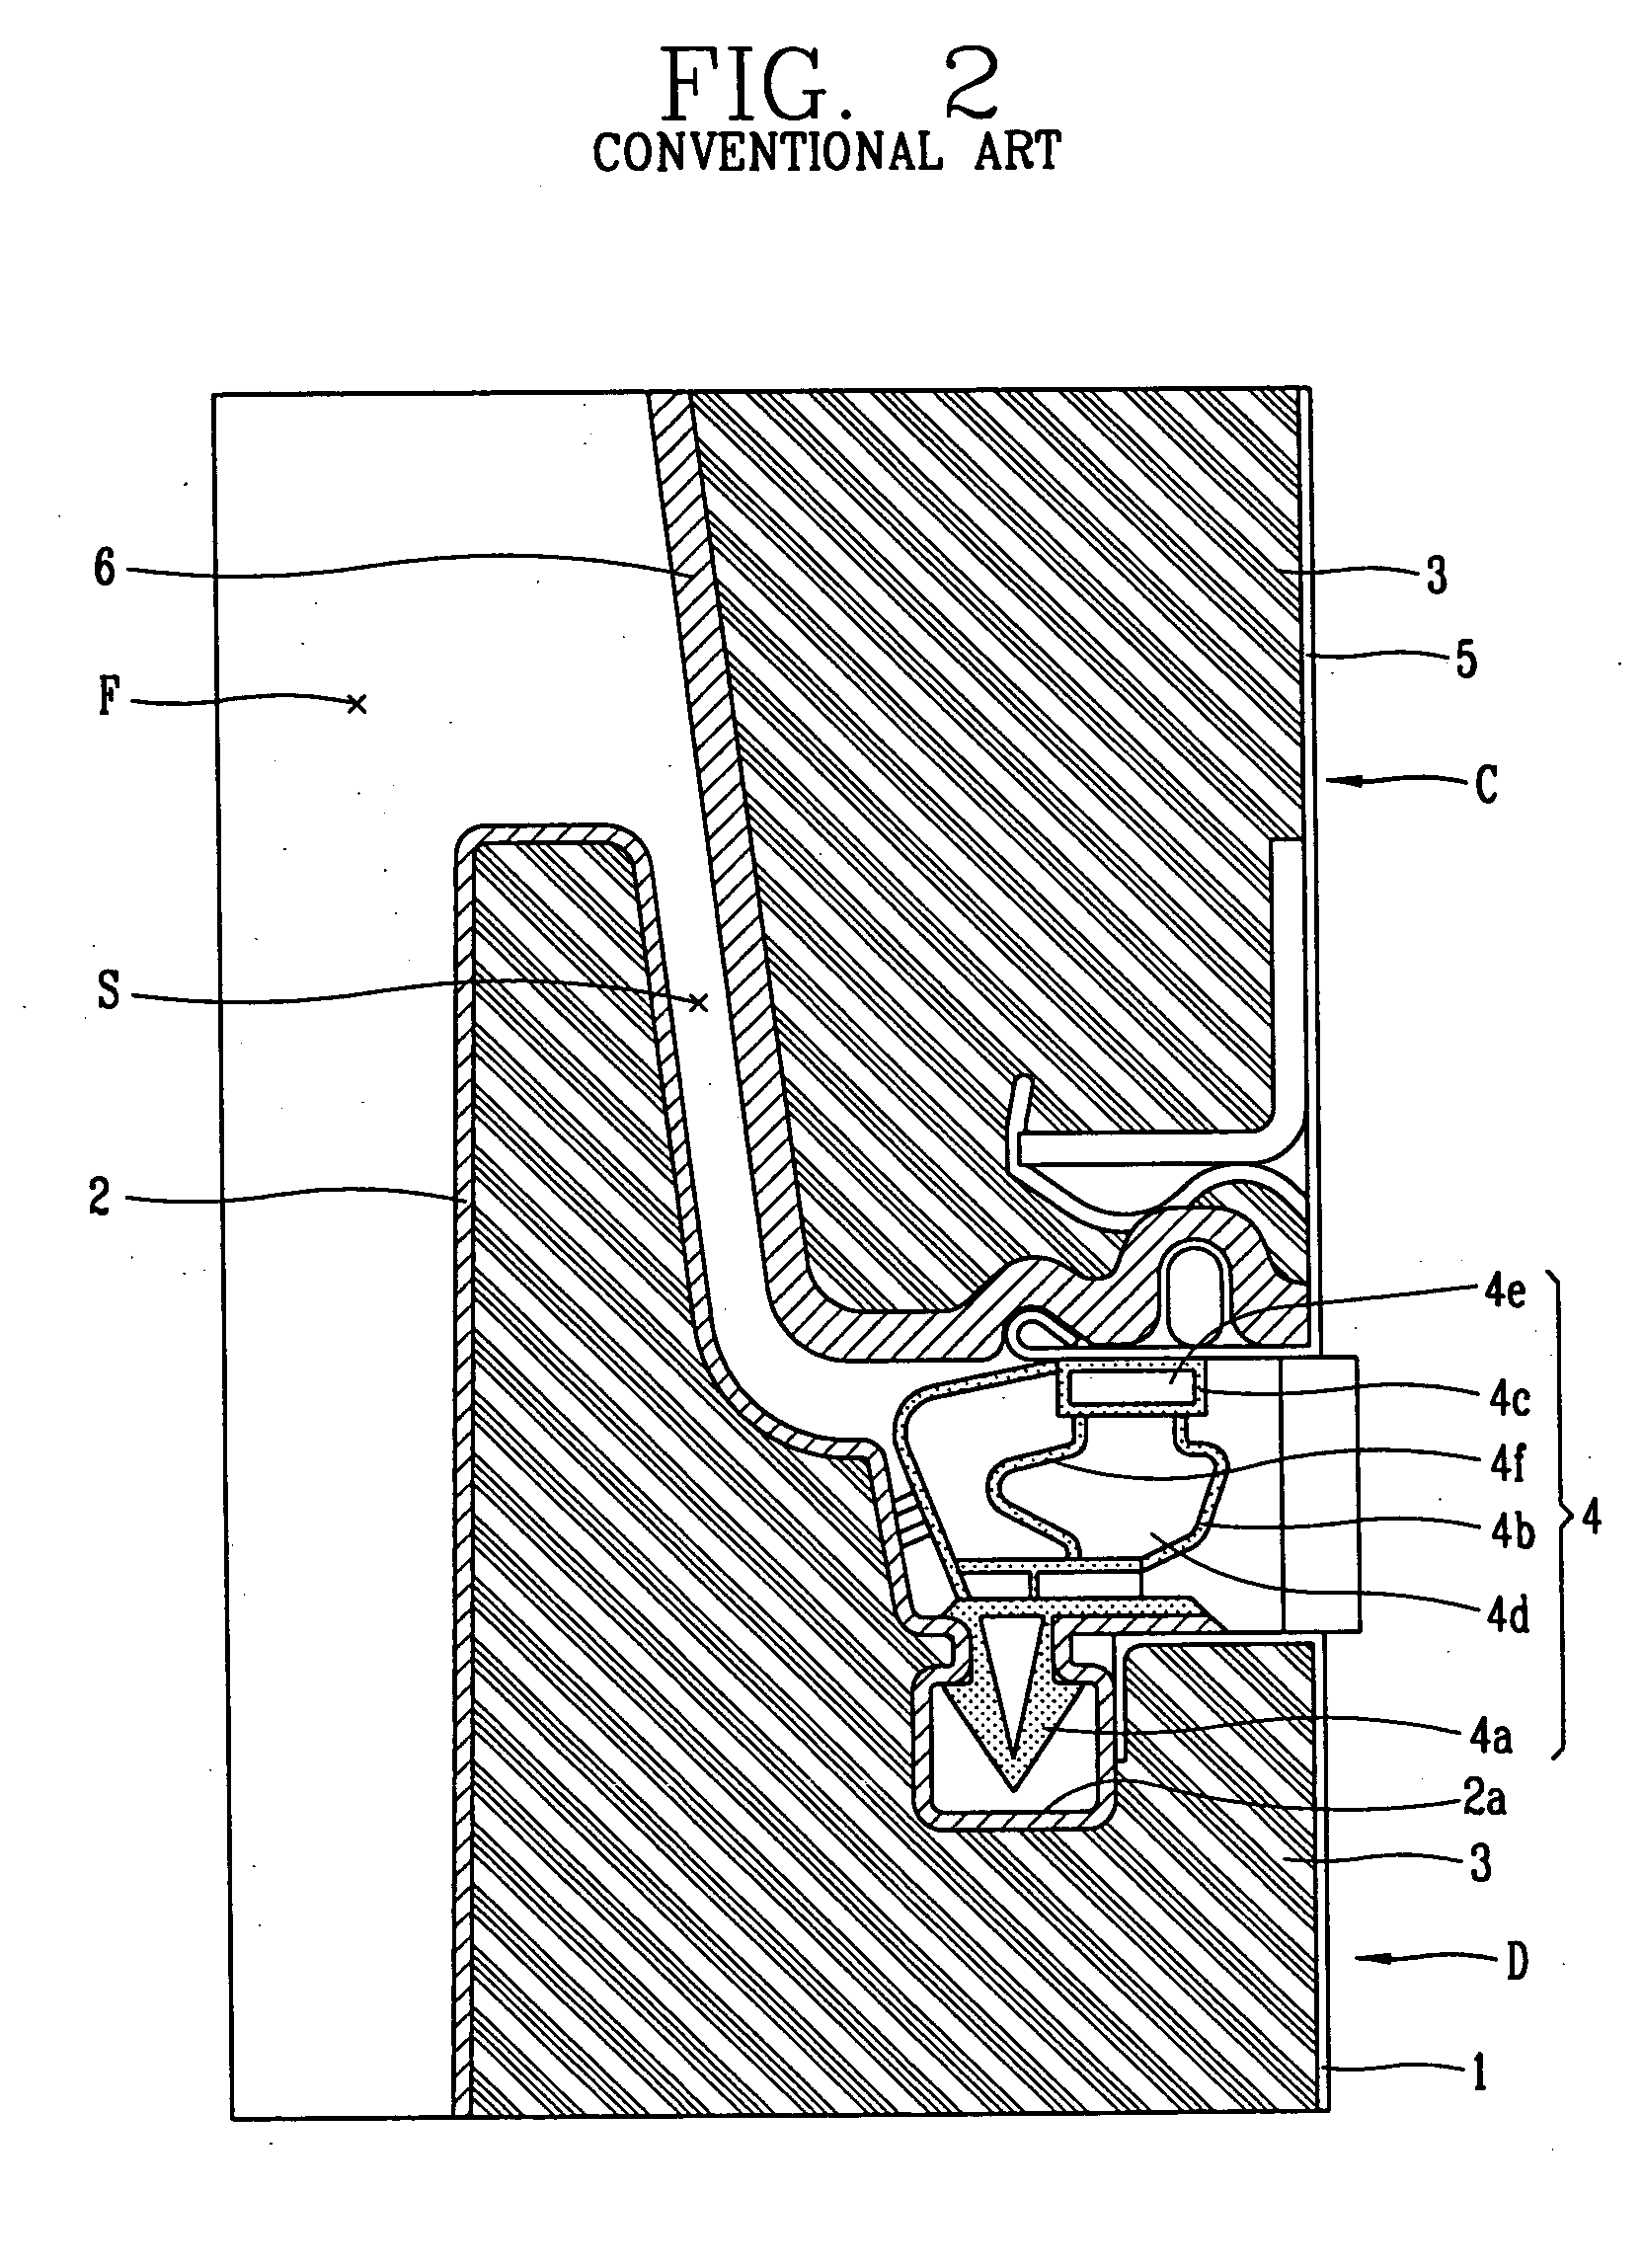 Sealing structure for refrigerator